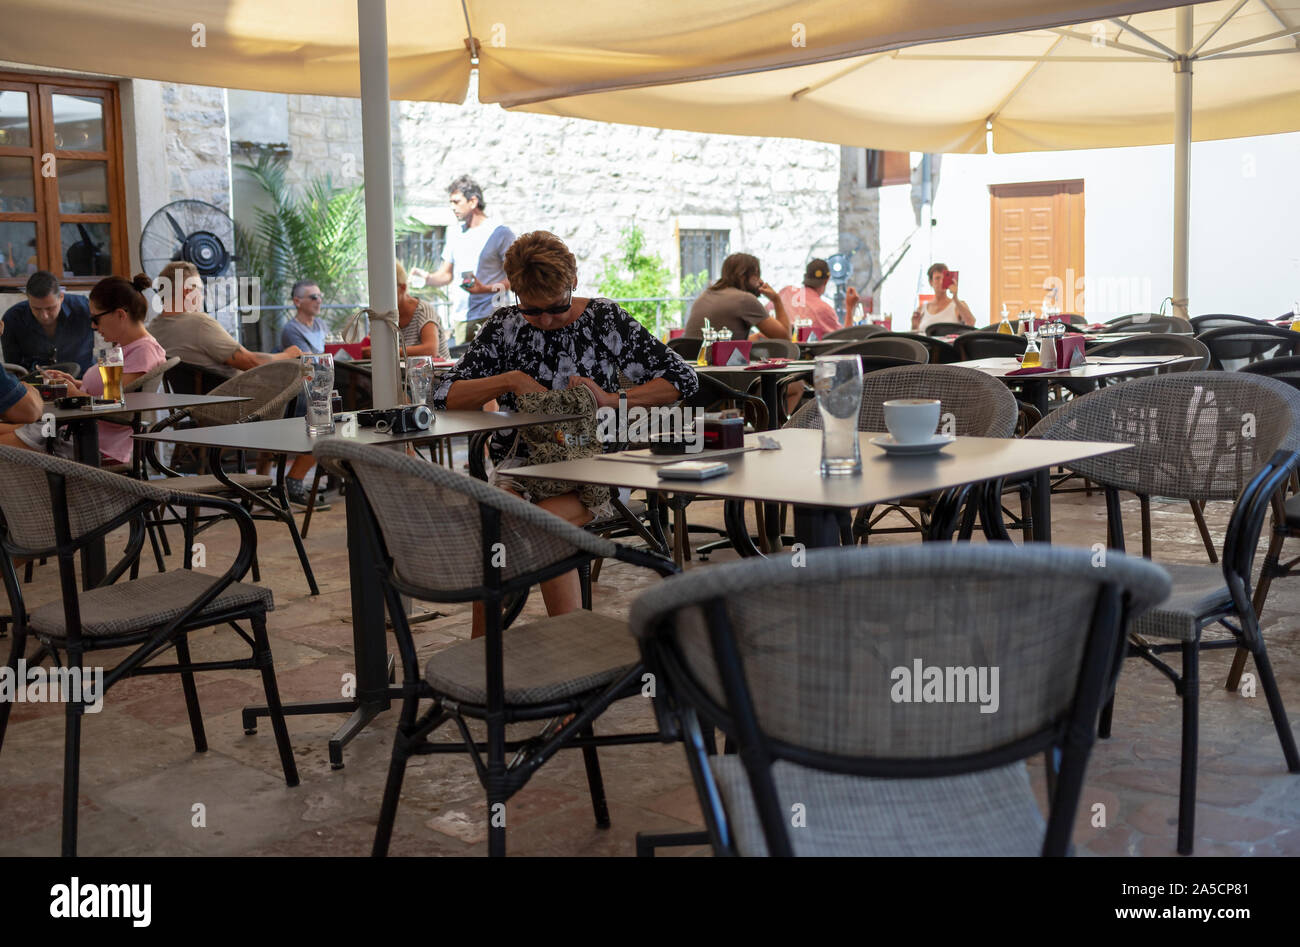 Montenegro, Sep 18, 2019: Guests sitting at an outdoor cafe in the Old Town of Kotor Stock Photo